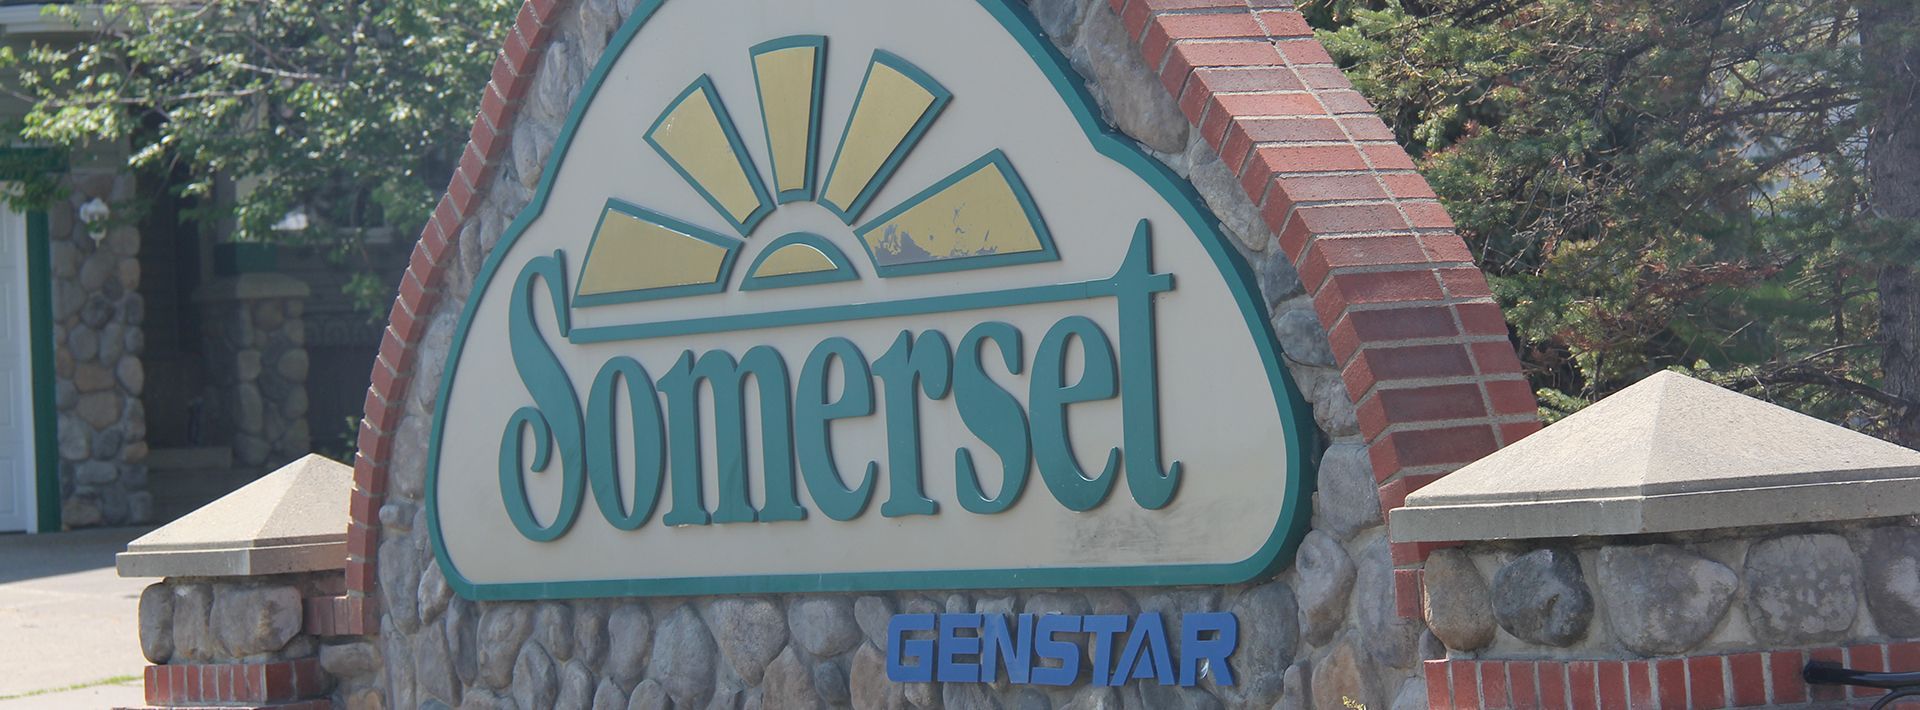 A stone sign with the word Somerset on it